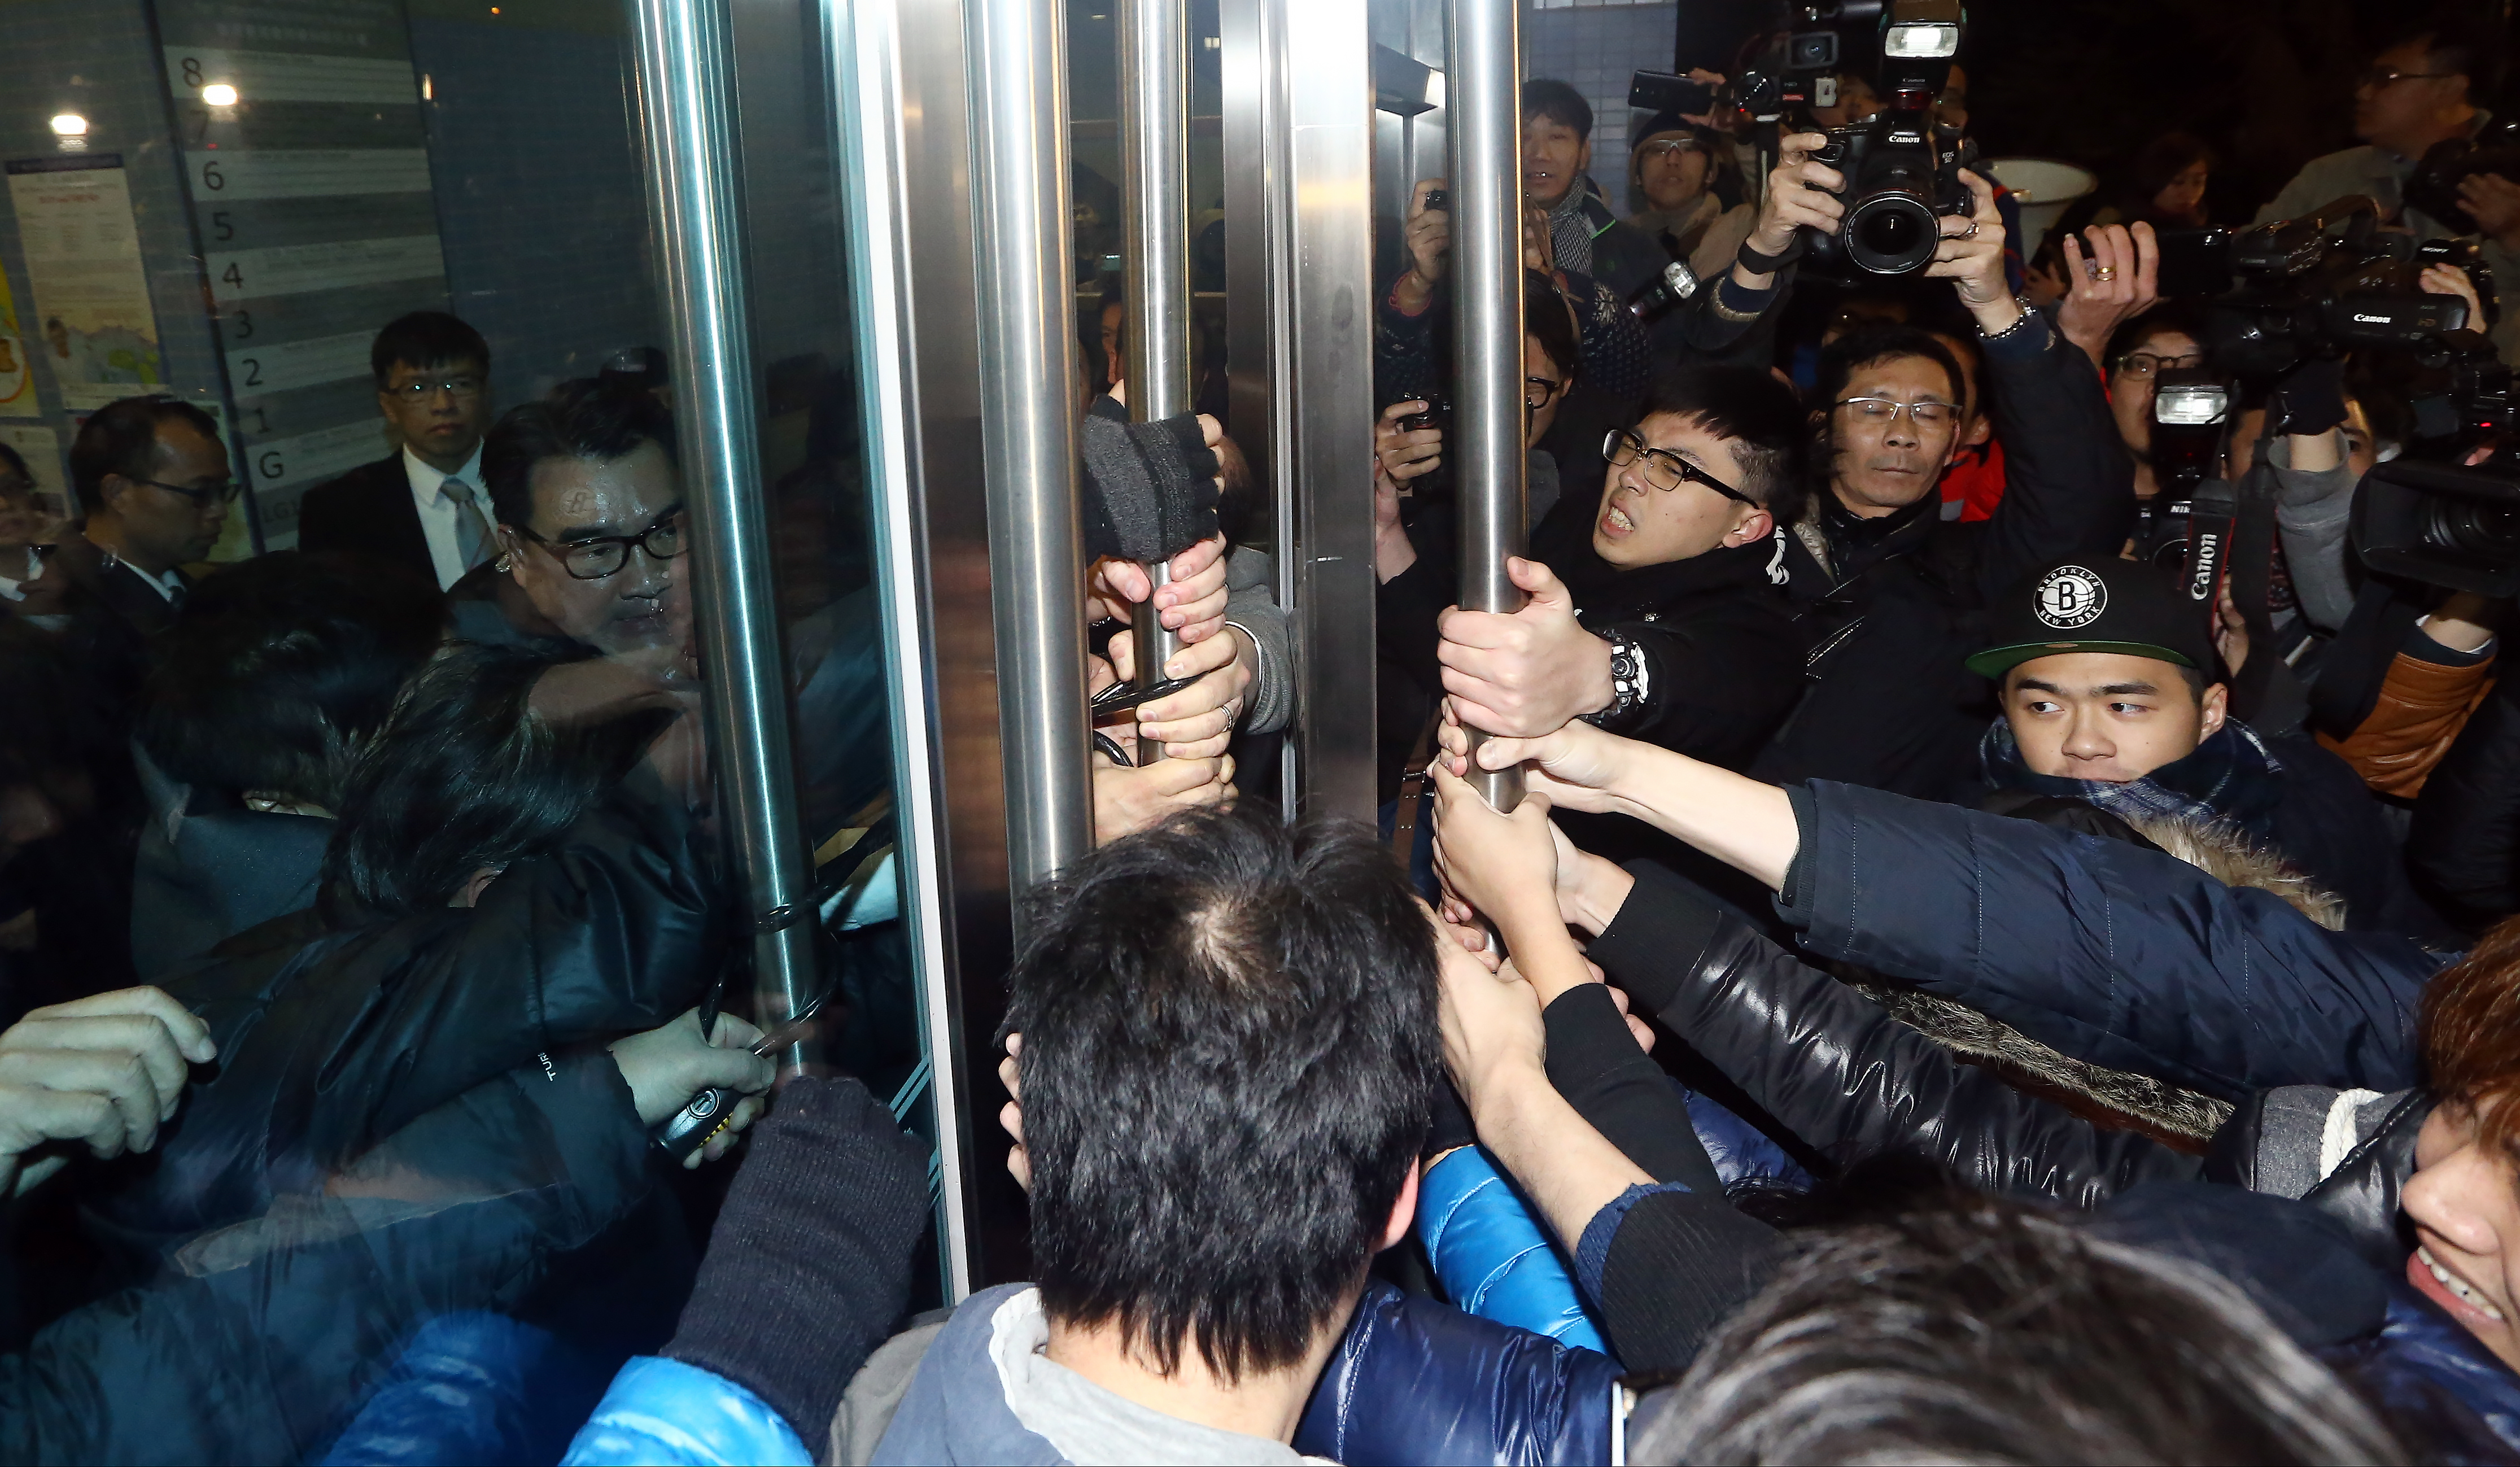 HKU students try to break into the The Hong Kong Jockey Club Building For Interdisciplinary Research on Sassoon Road in Pok Fu Lam, where Chairman of the governing Council of the University of Hong Kong Arthur Li Kwok-cheung is. Li refused to talk to students. 26JAN16 SCMP/Sam Tsang